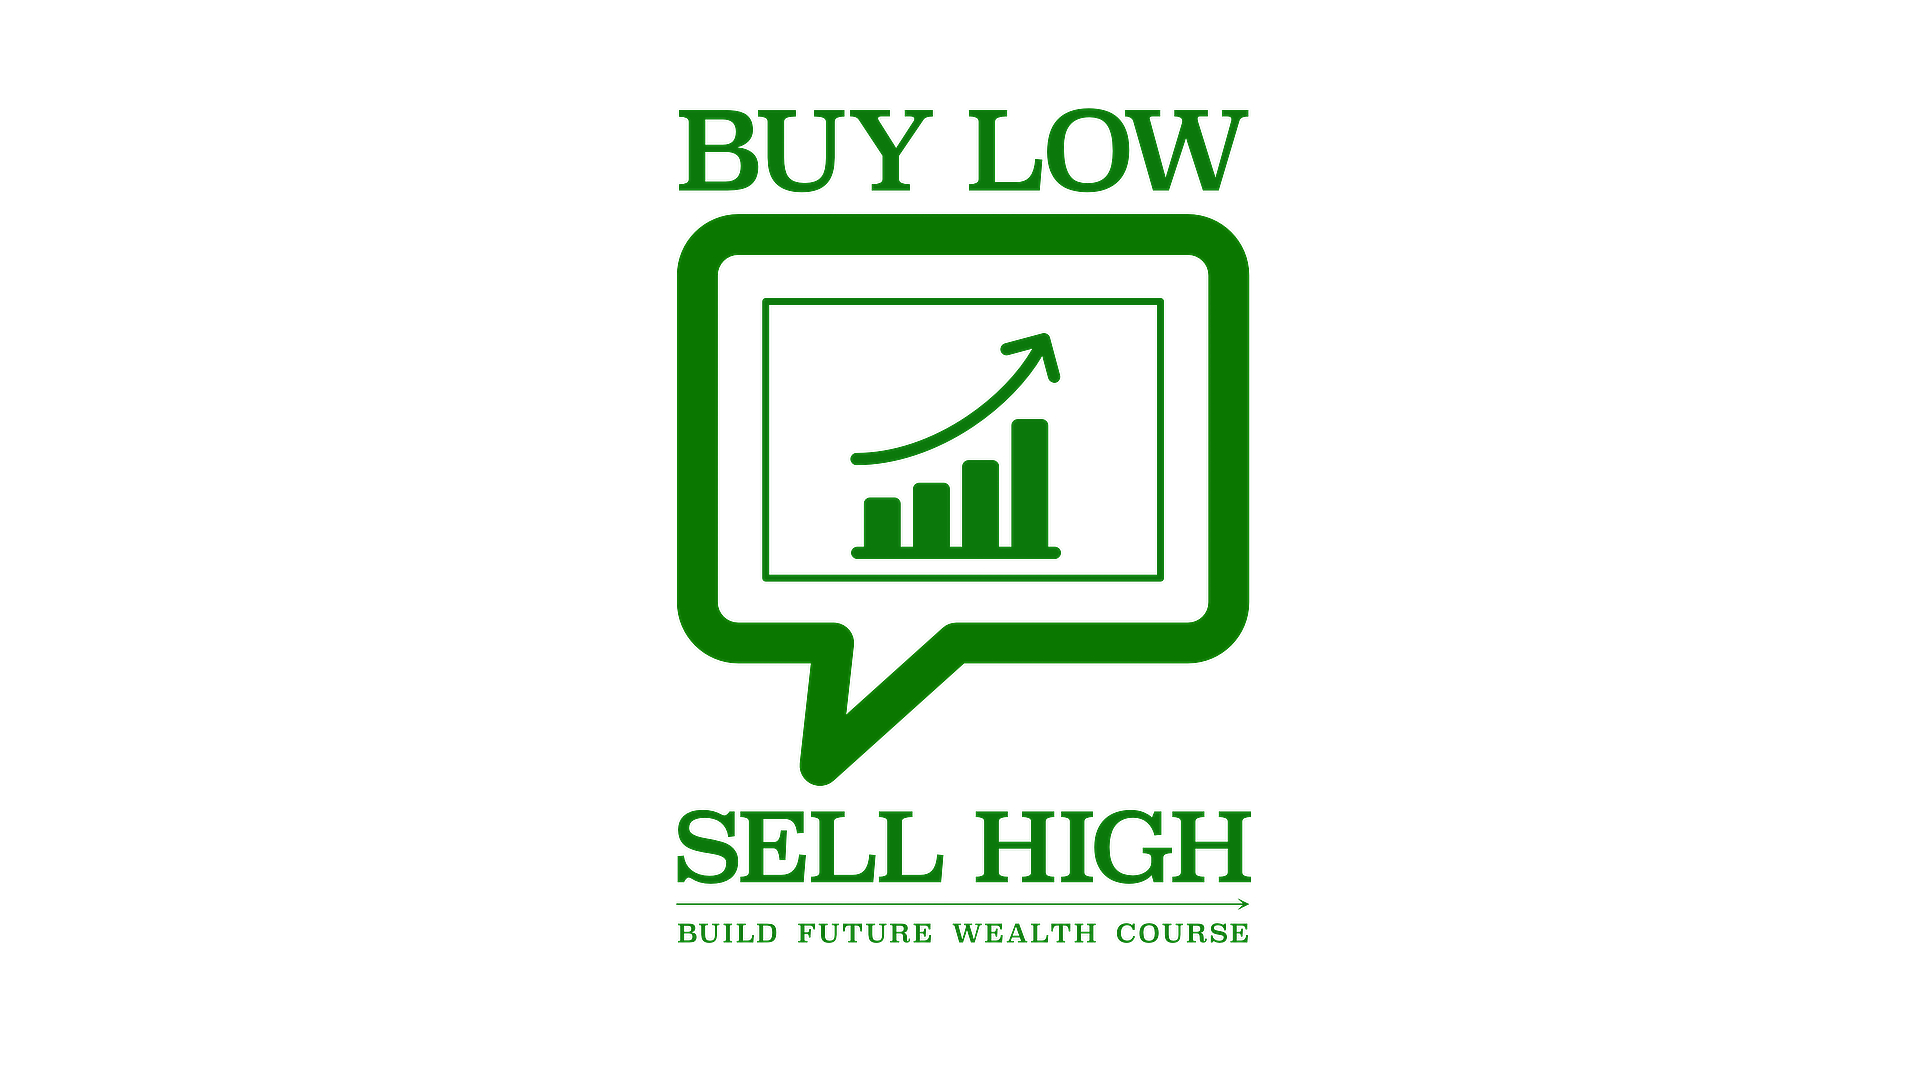 Learn Pure Elliott Wave Online Course by Lara Iriarte book cover